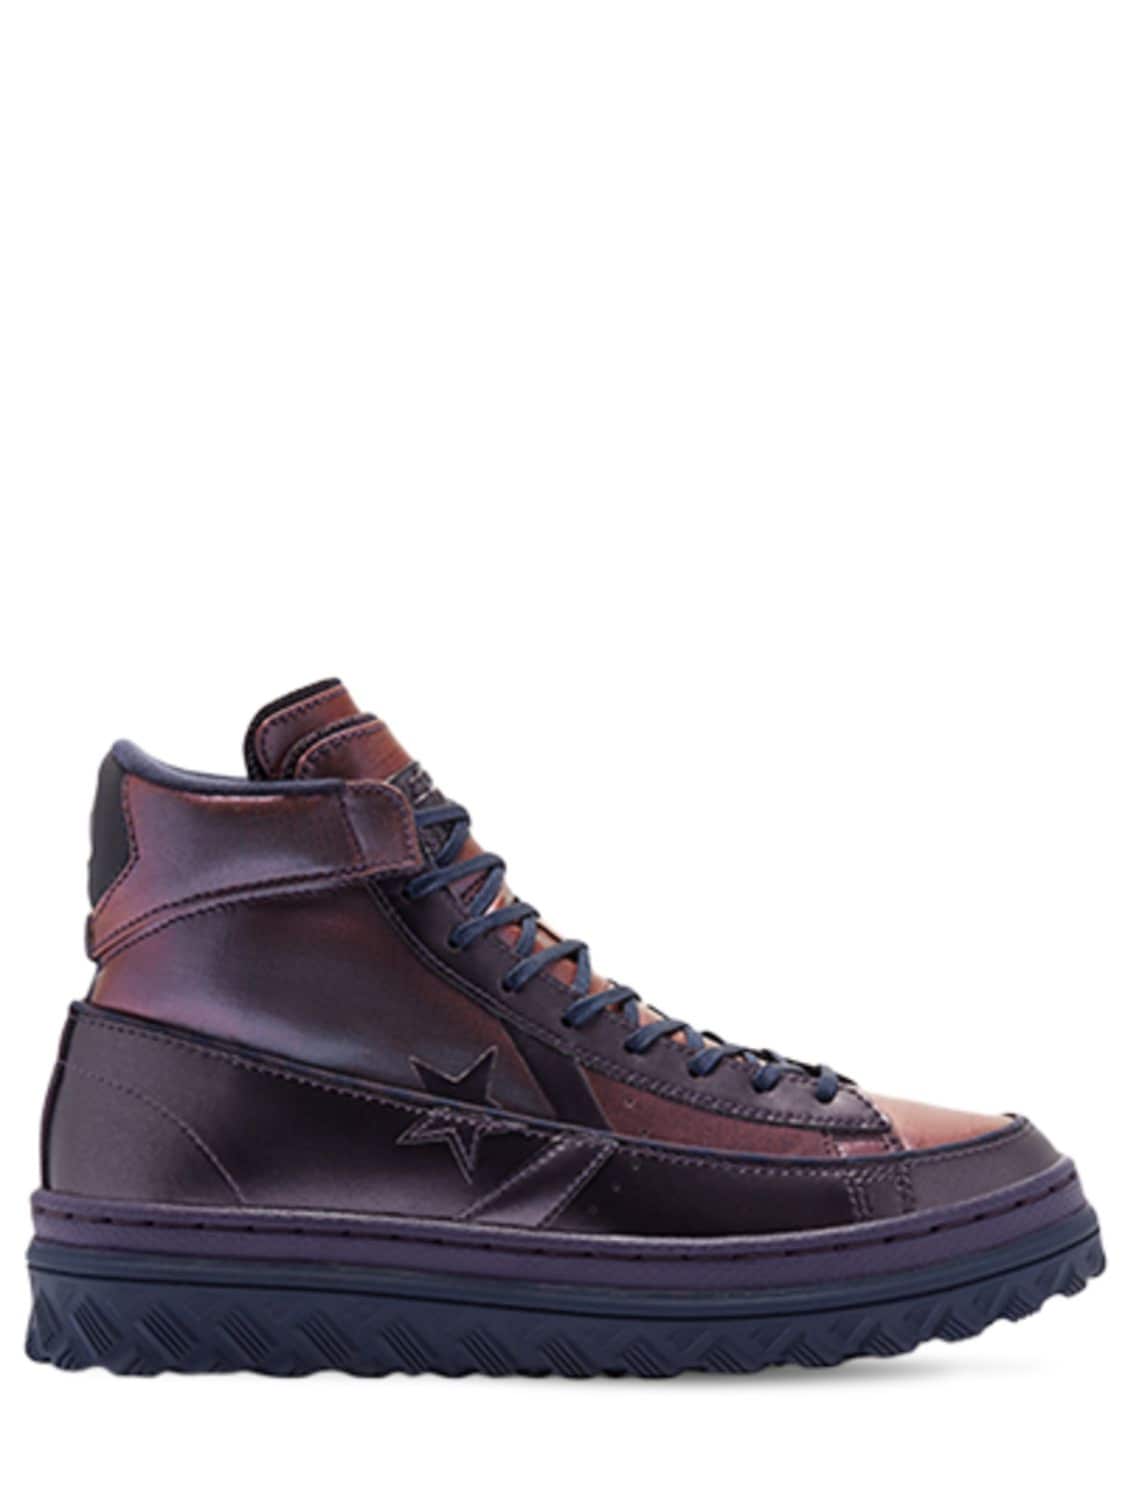 Converse Pro Leather Hacked Sneakers In Purple